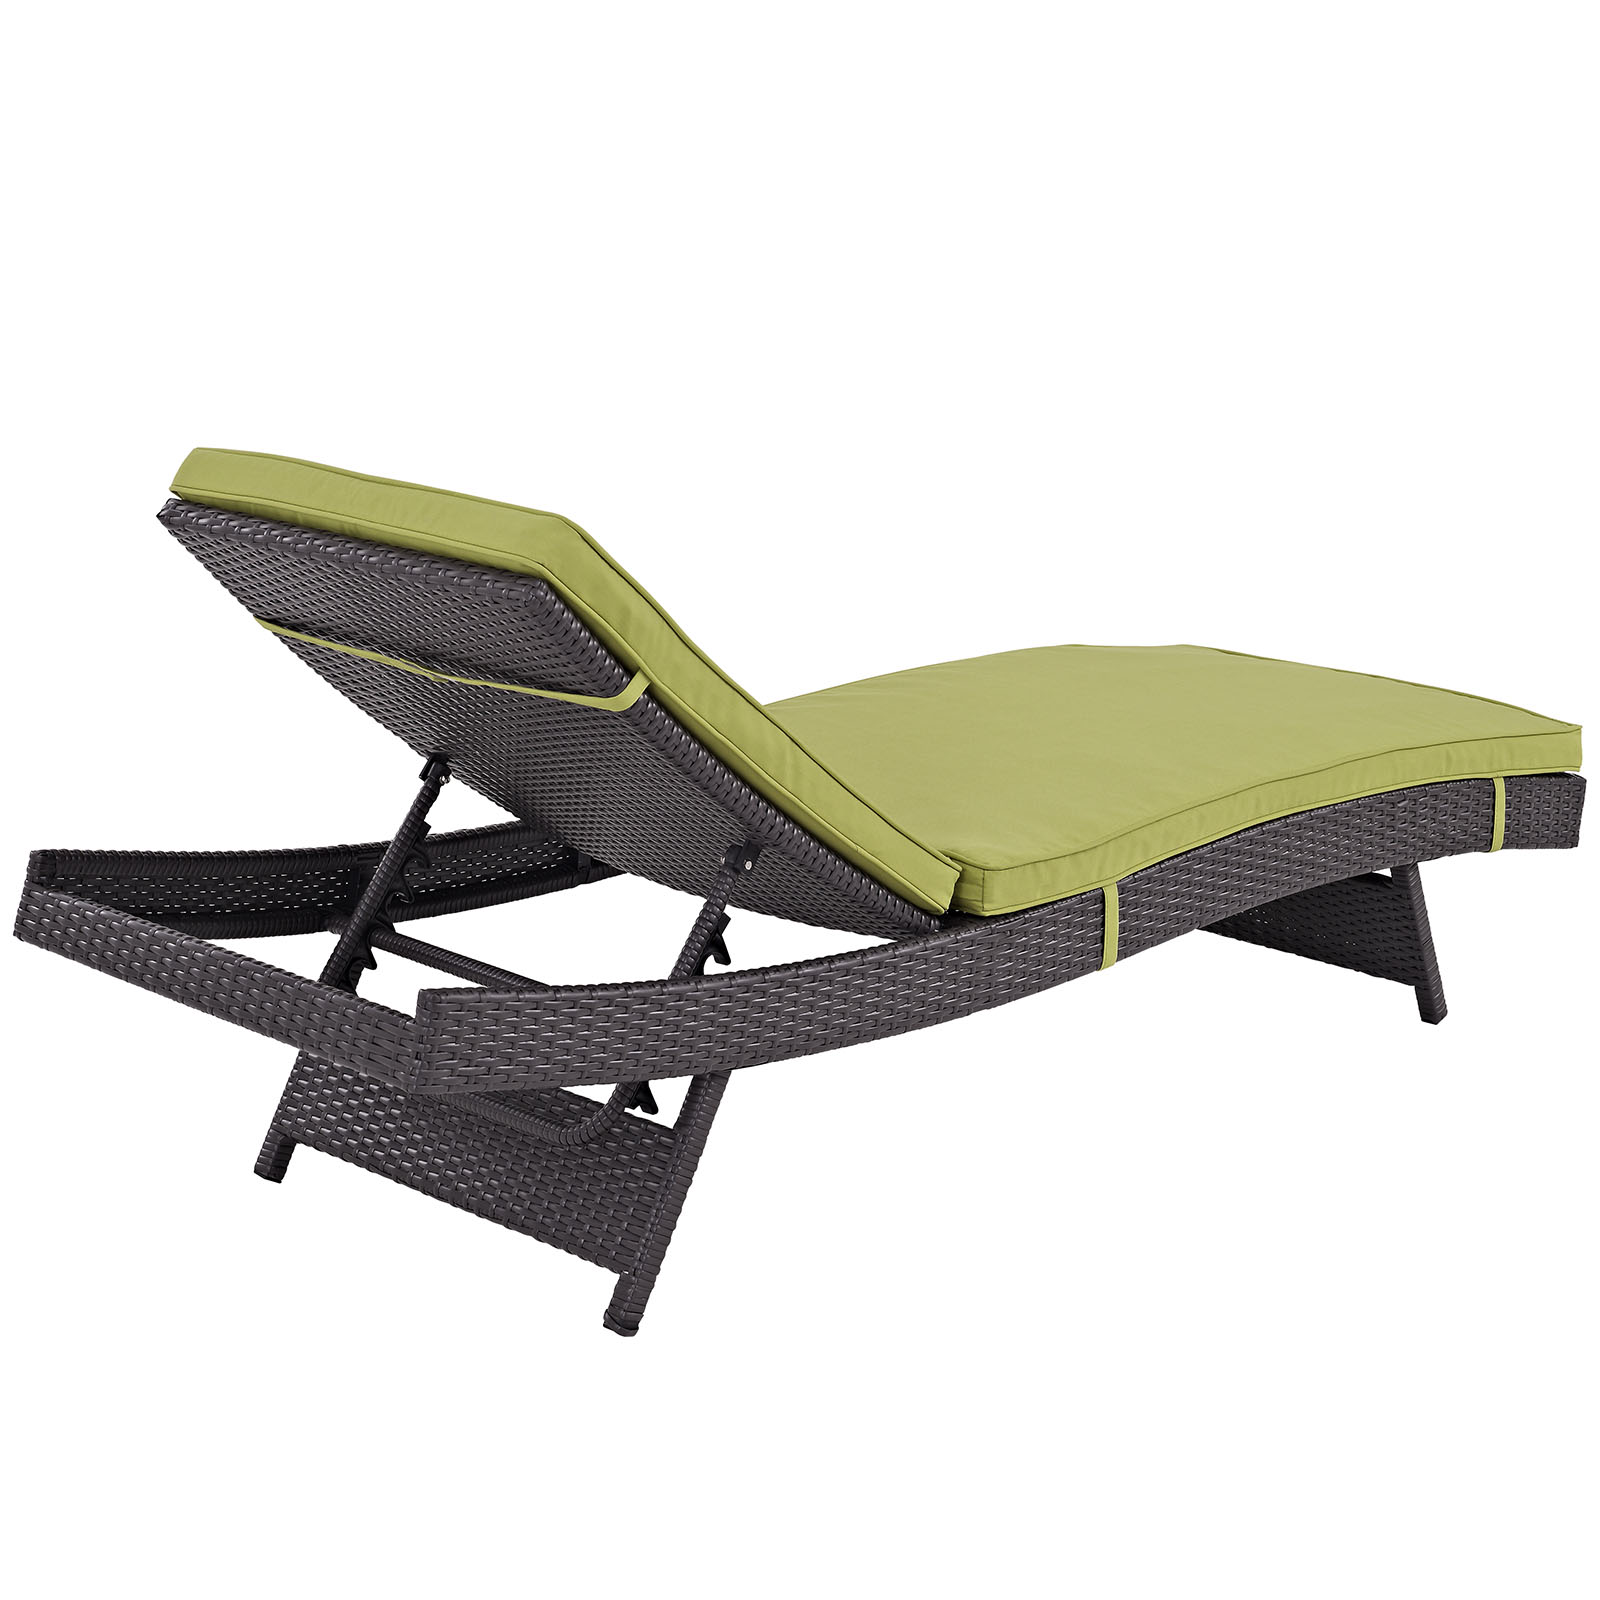 Modway Convene Chaise Outdoor Patio Set of 6 in Espresso Peridot - image 5 of 5